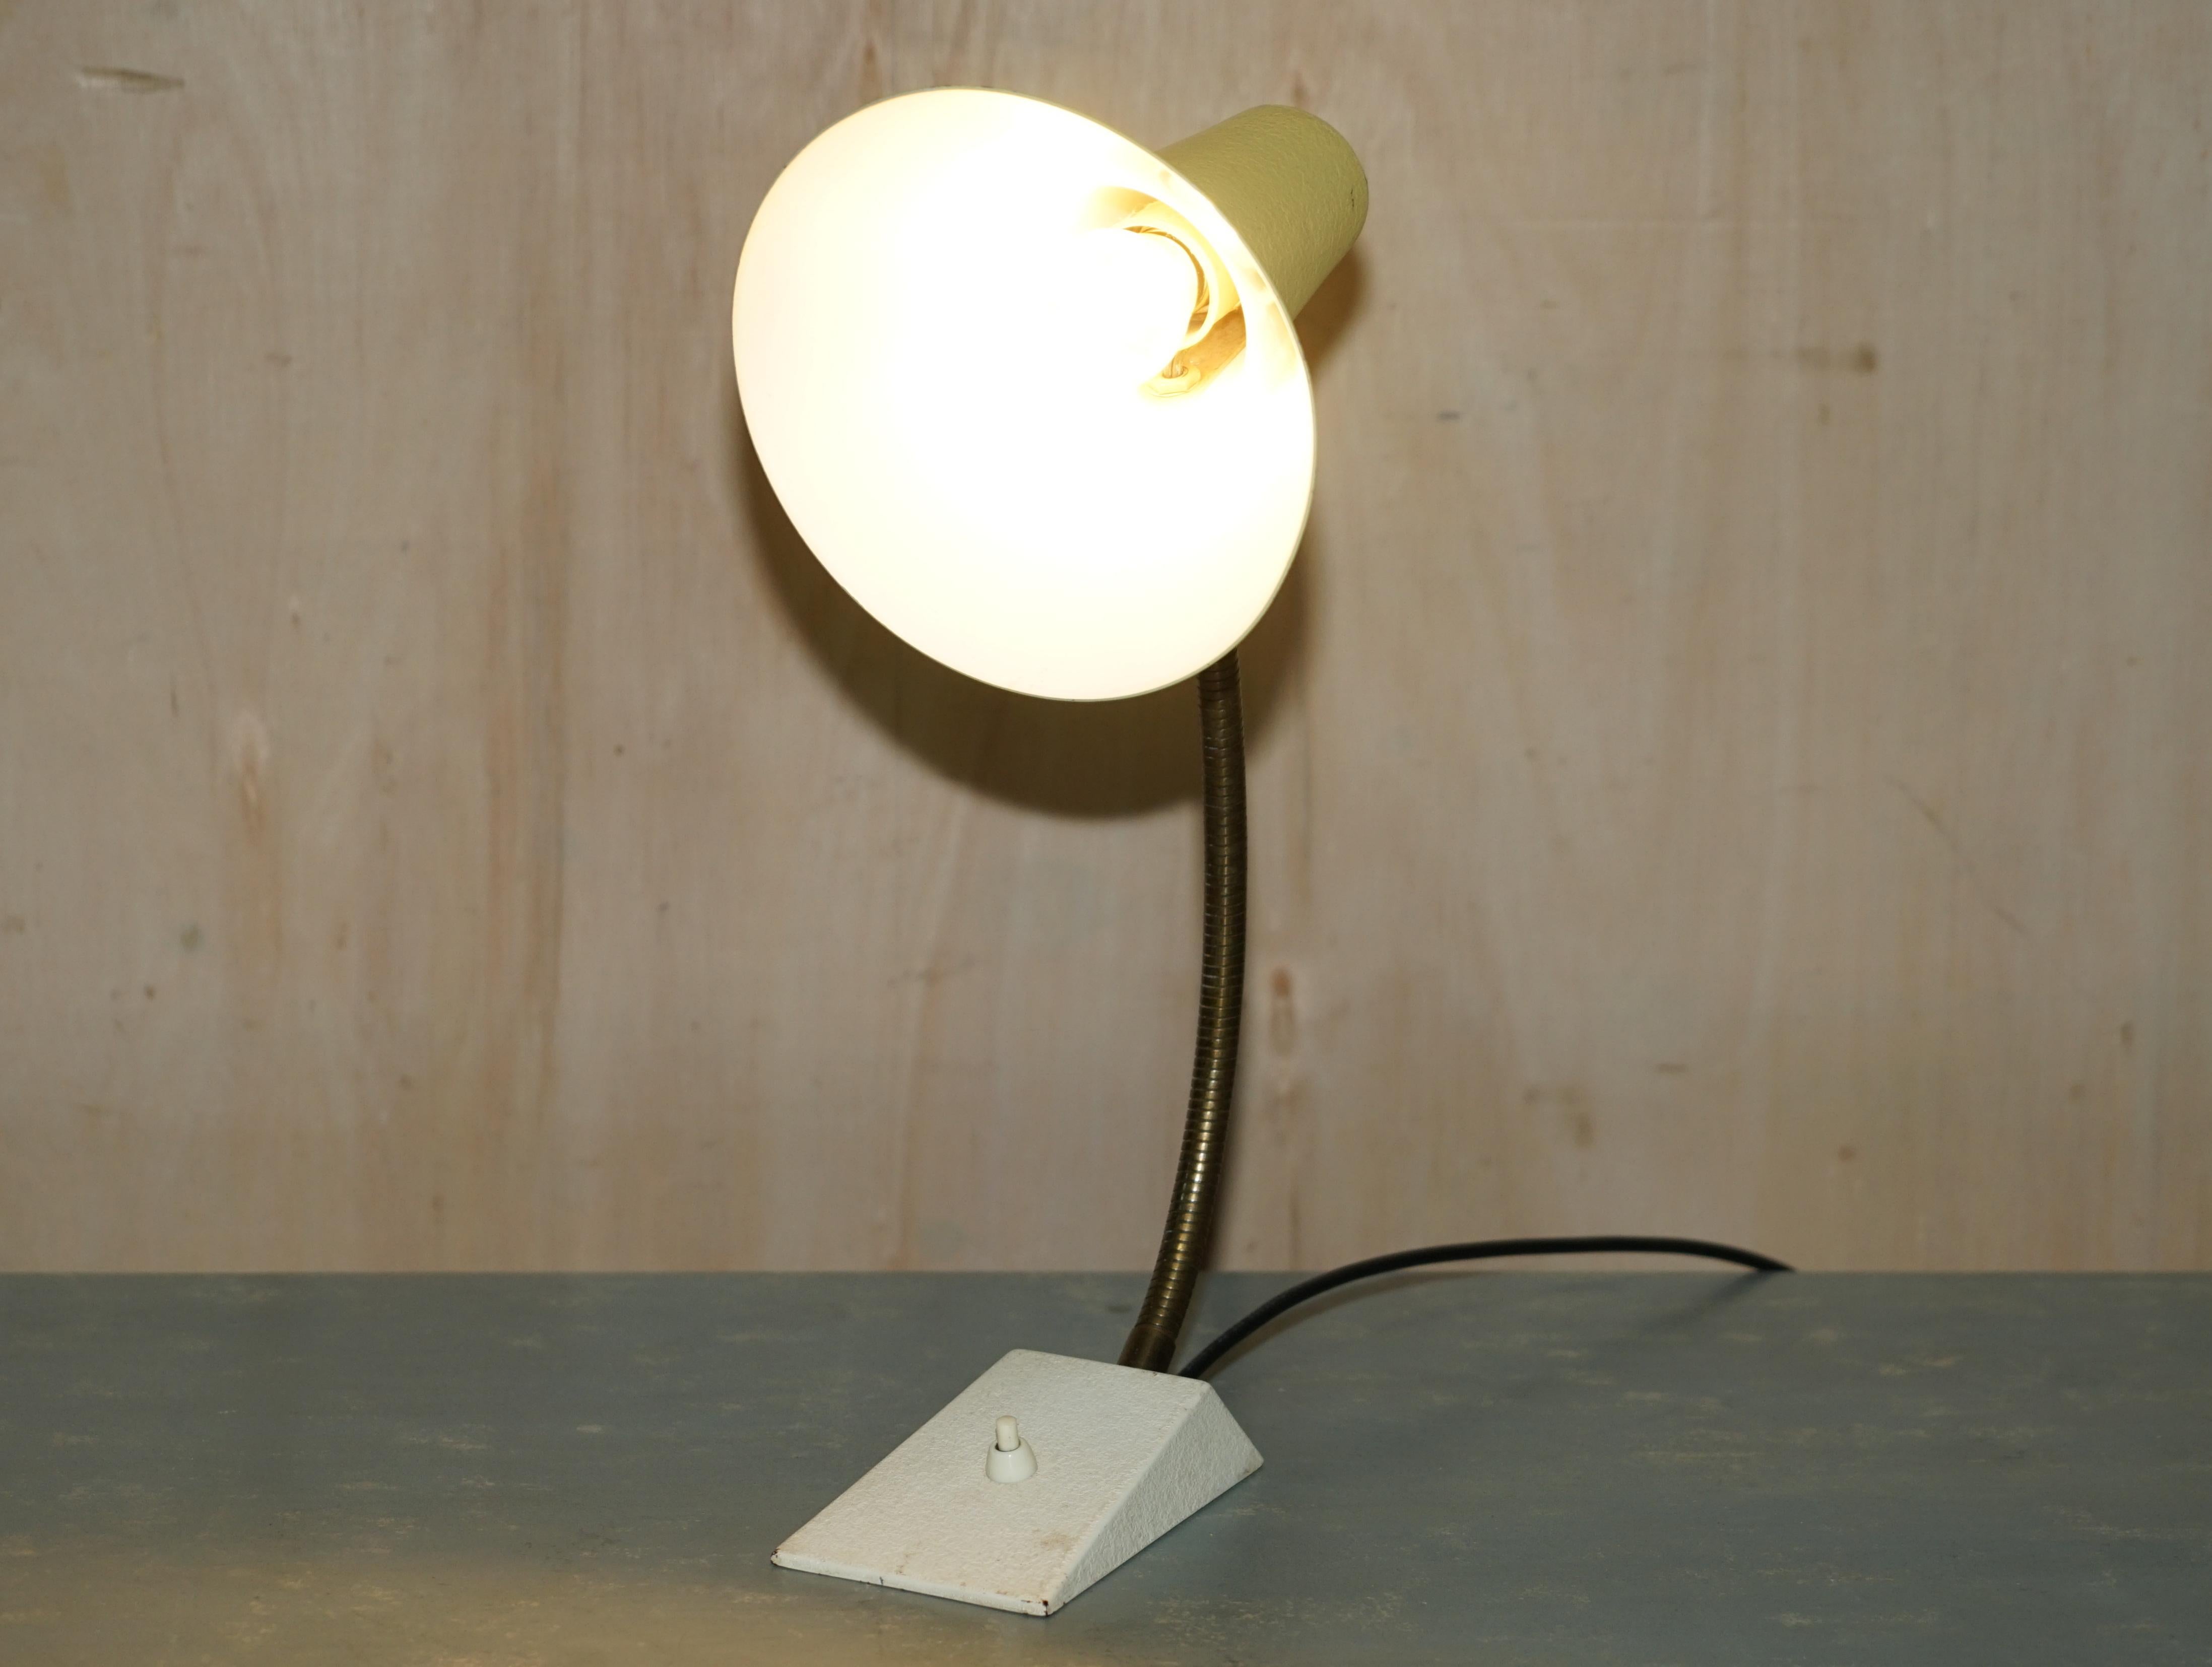 English Vintage Mid-Century Modern Philips Desk Lamp Collectable & Cool For Sale